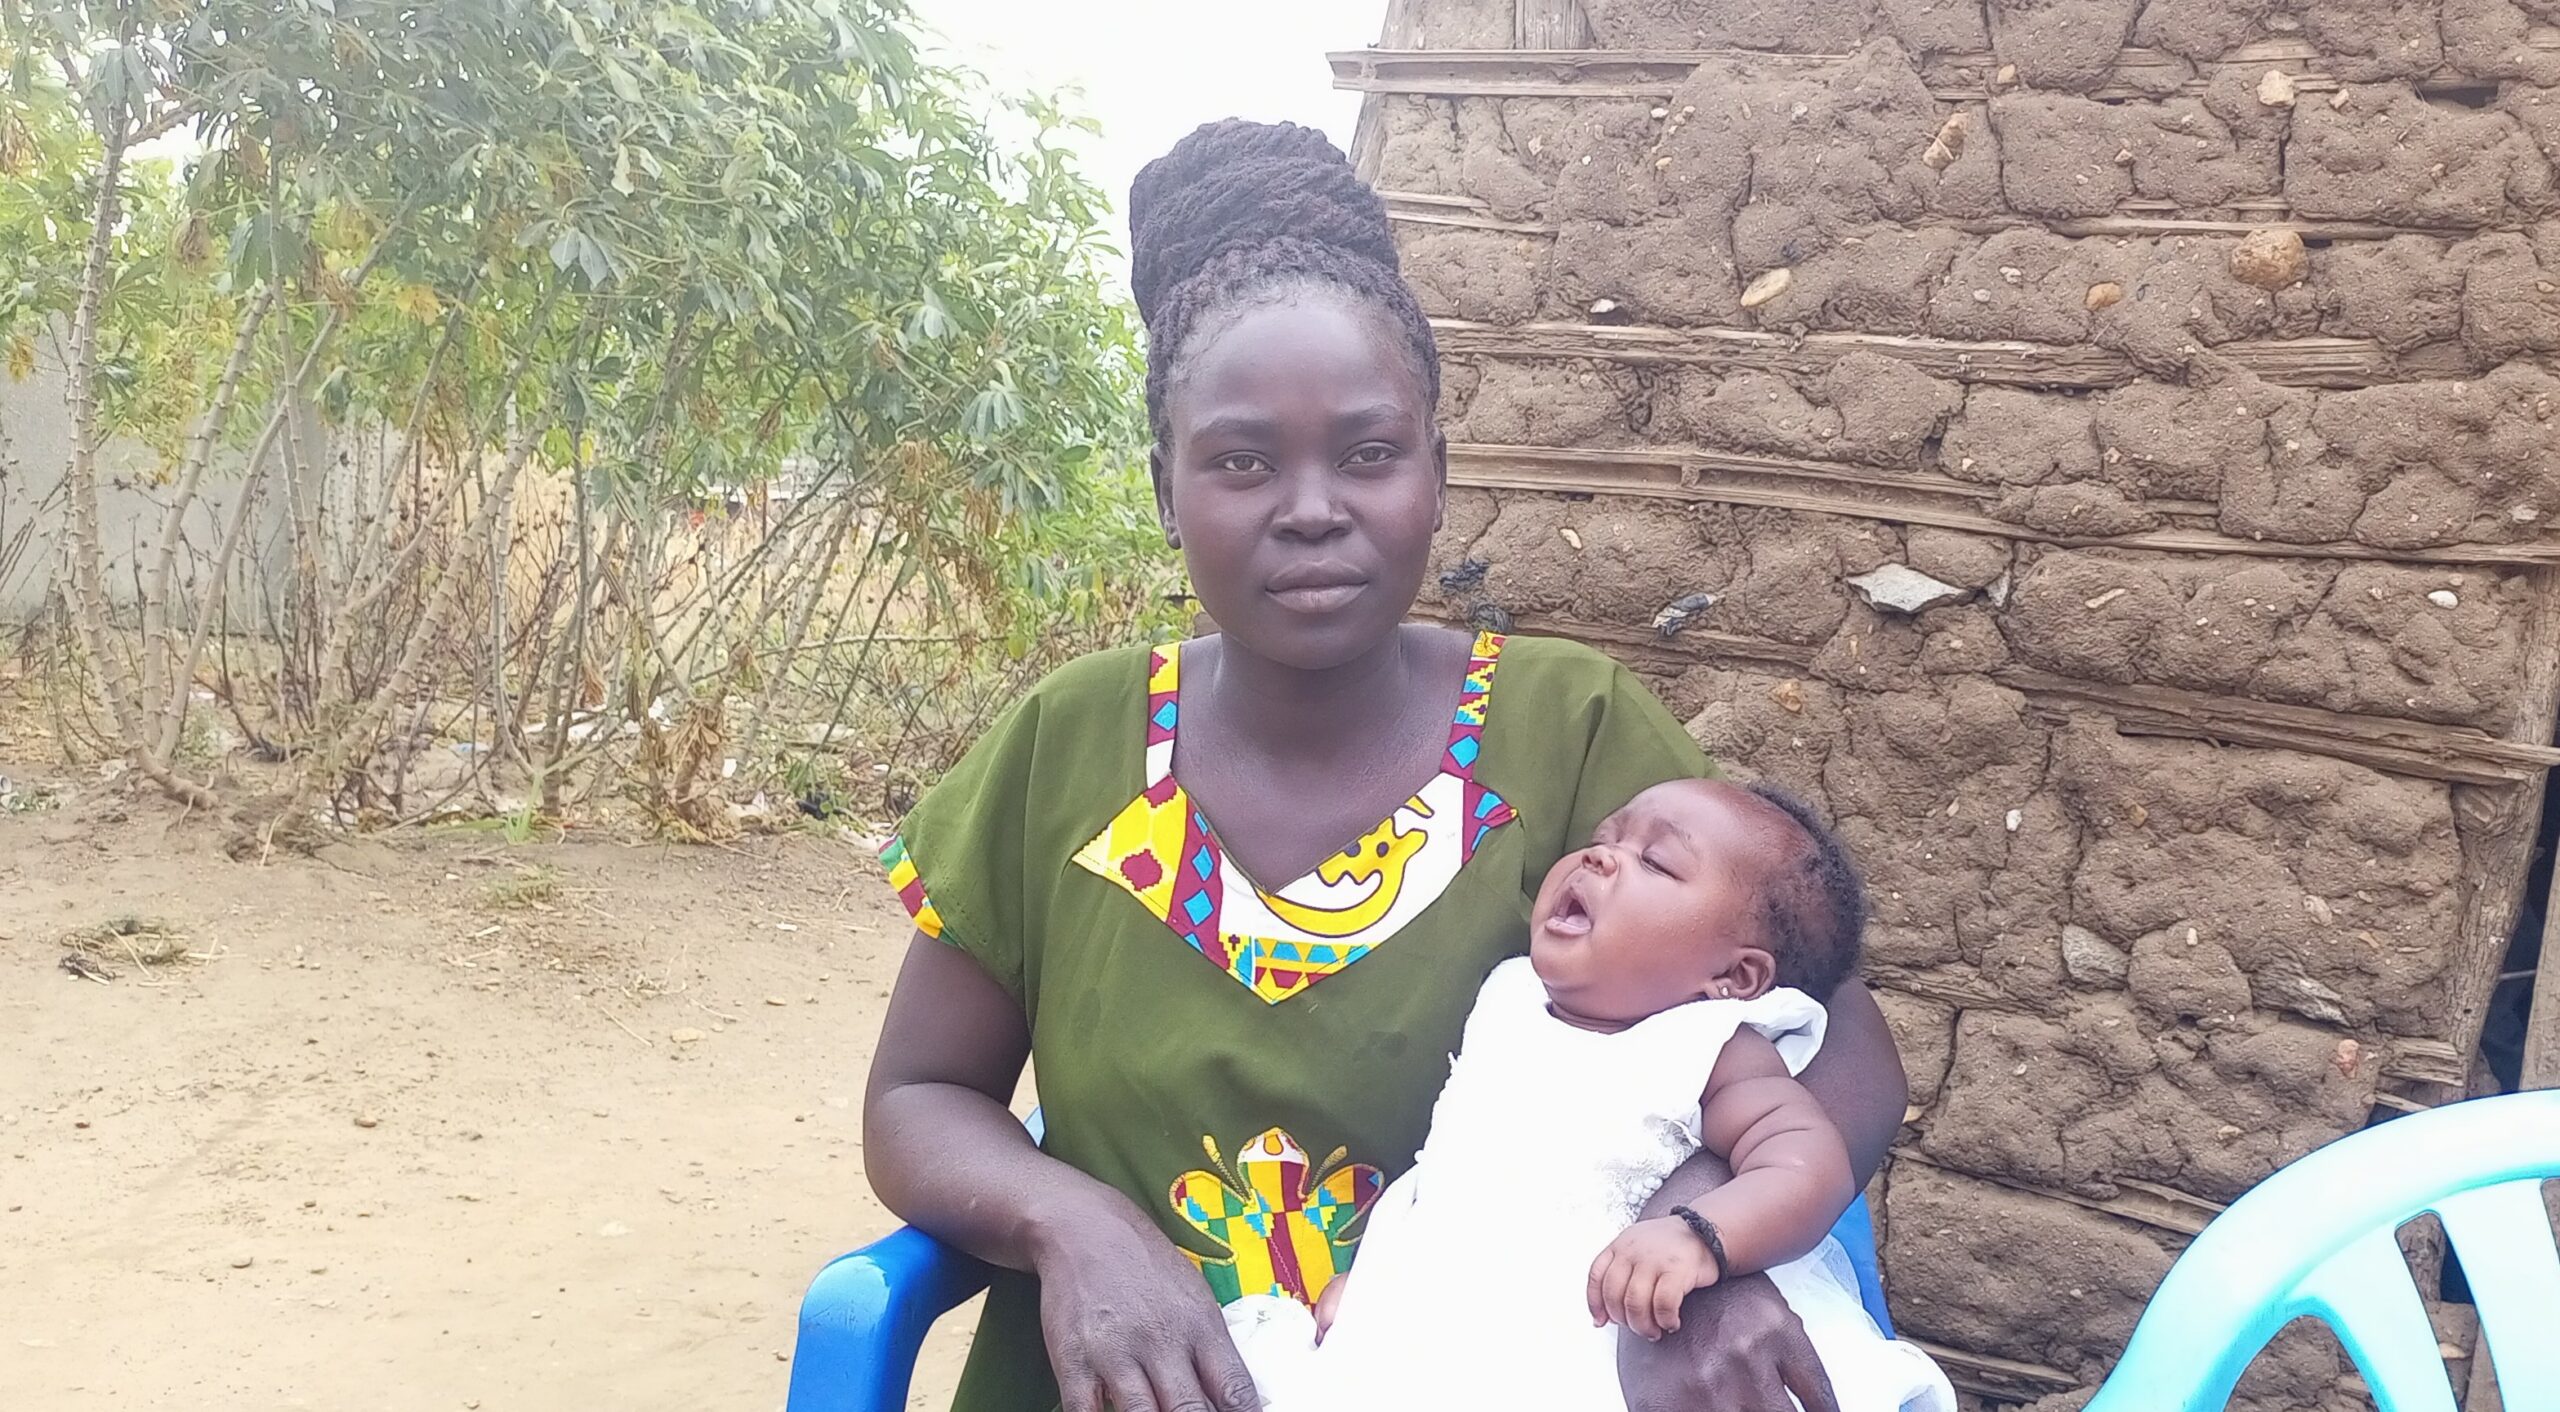 Juba’s abducted baby is reunited with her parents